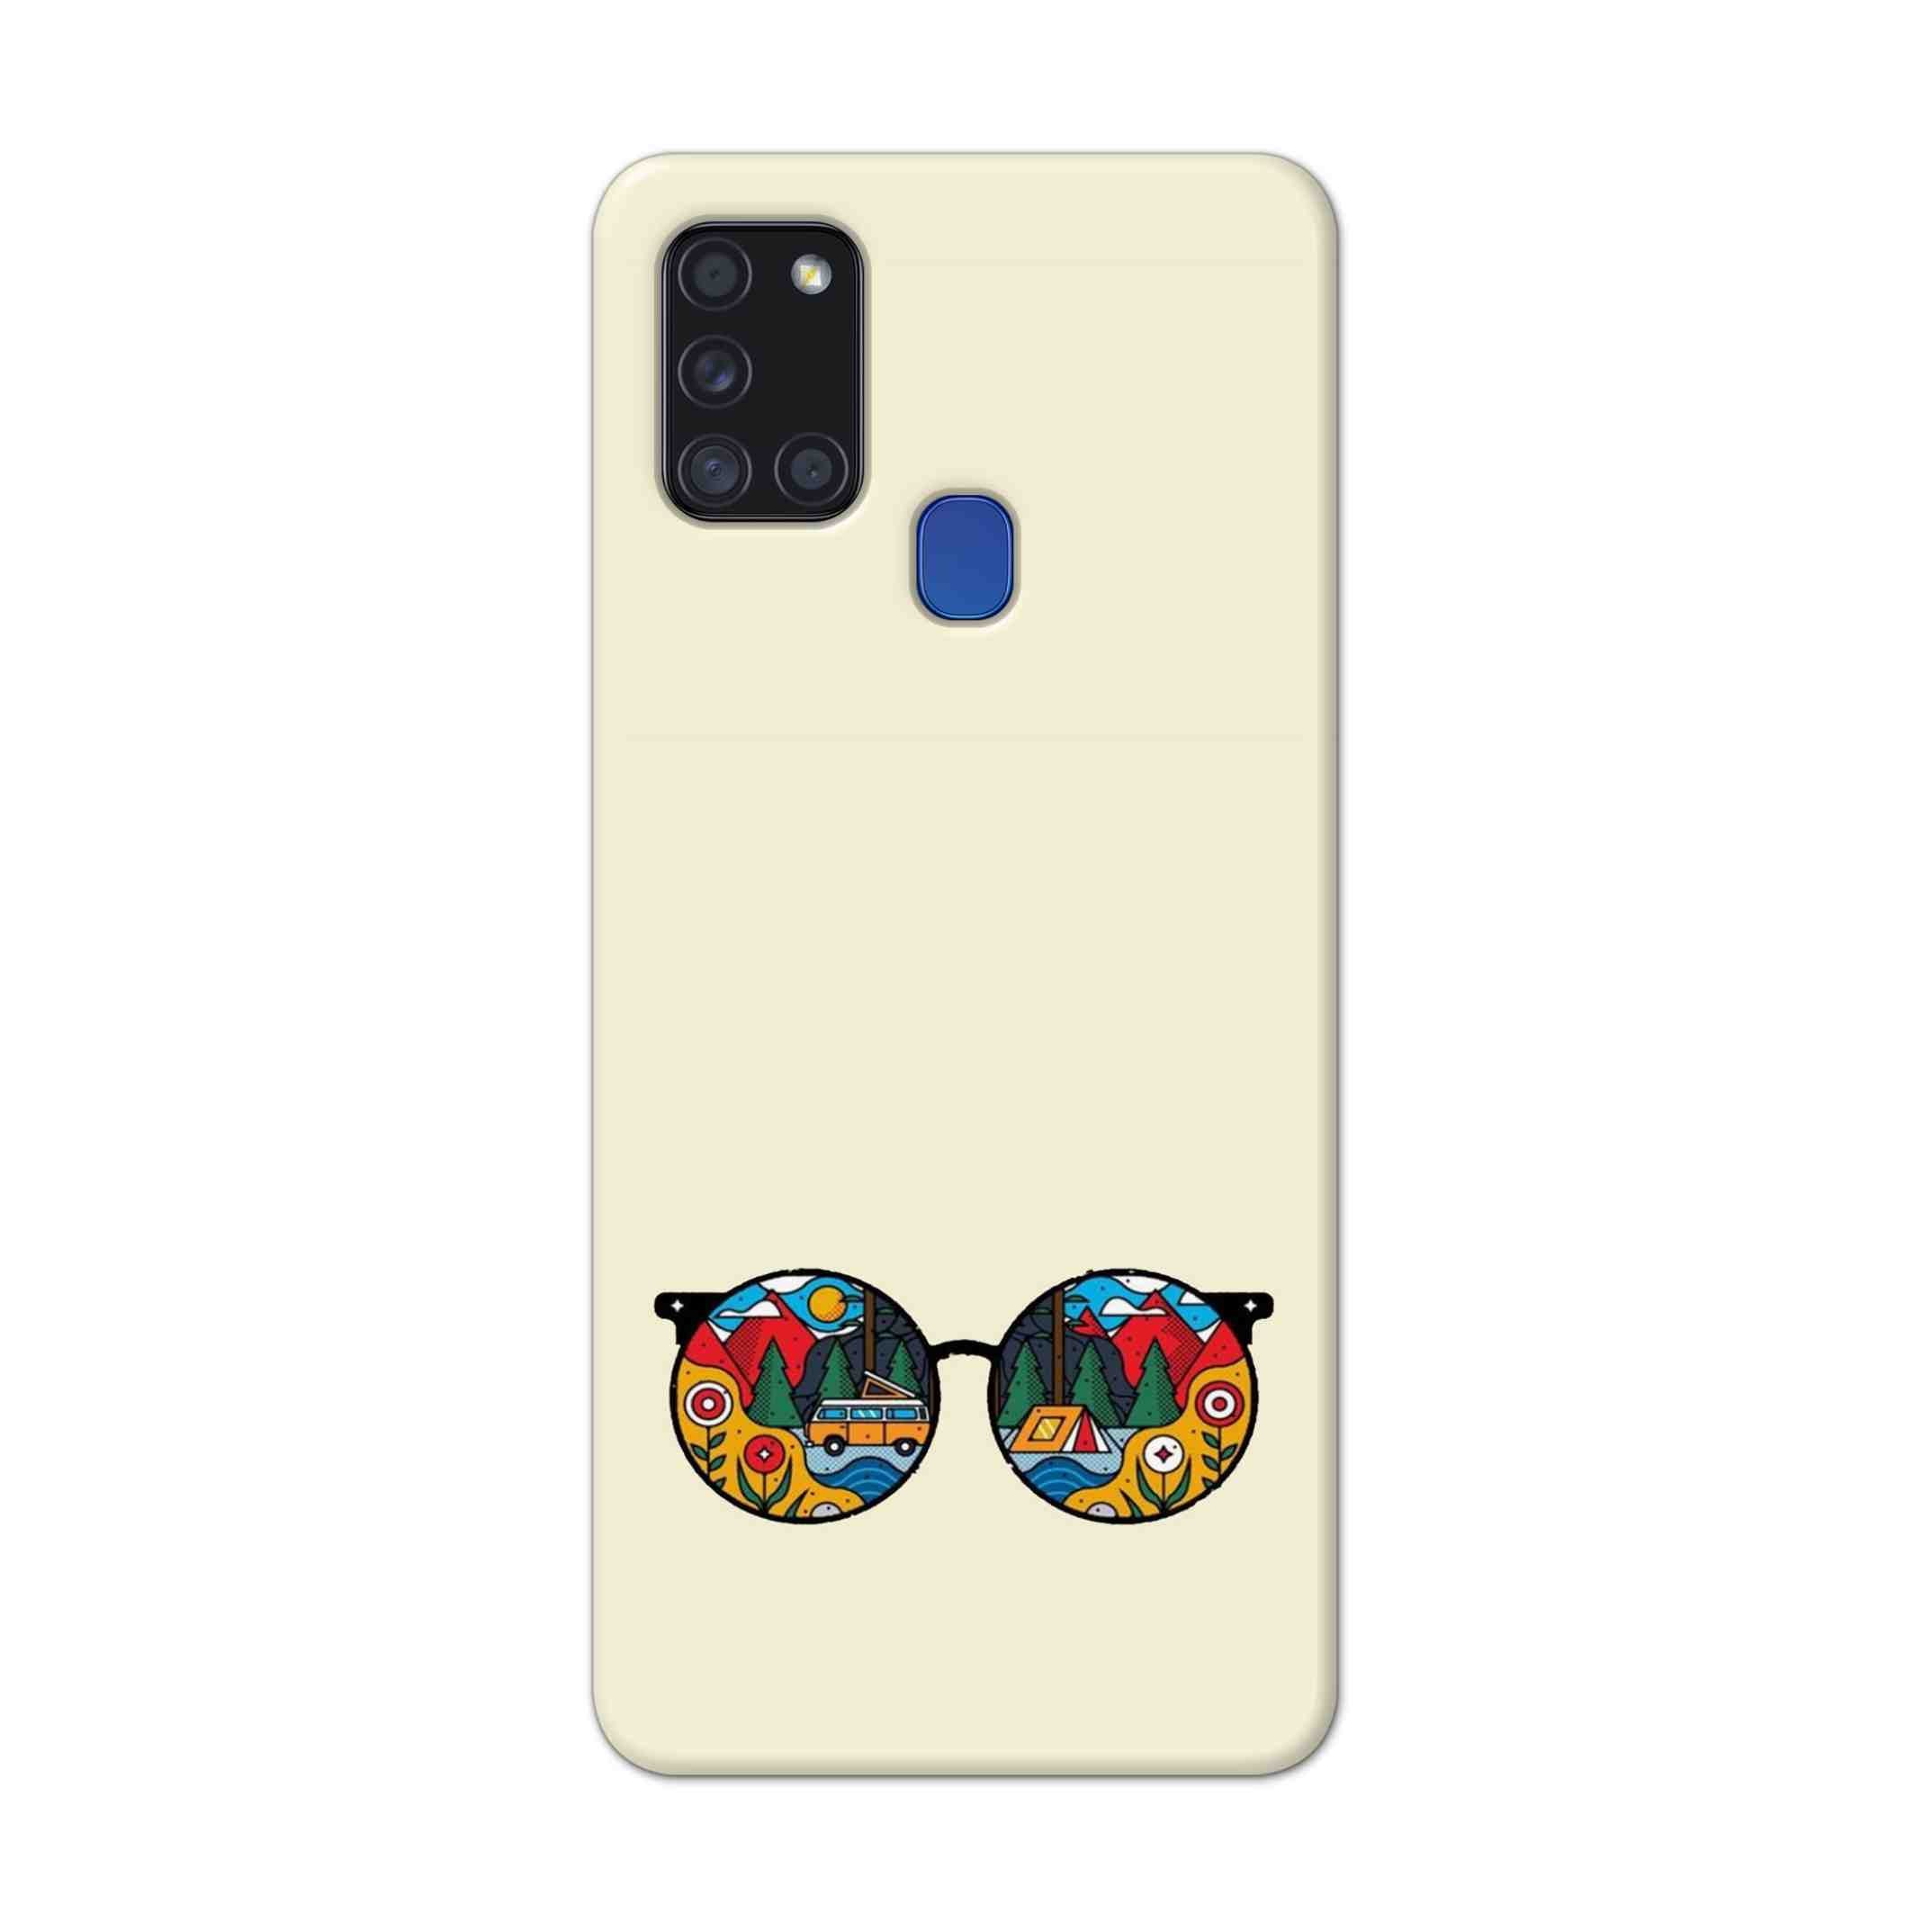 Buy Rainbow Sunglasses Hard Back Mobile Phone Case Cover For Samsung Galaxy A21s Online